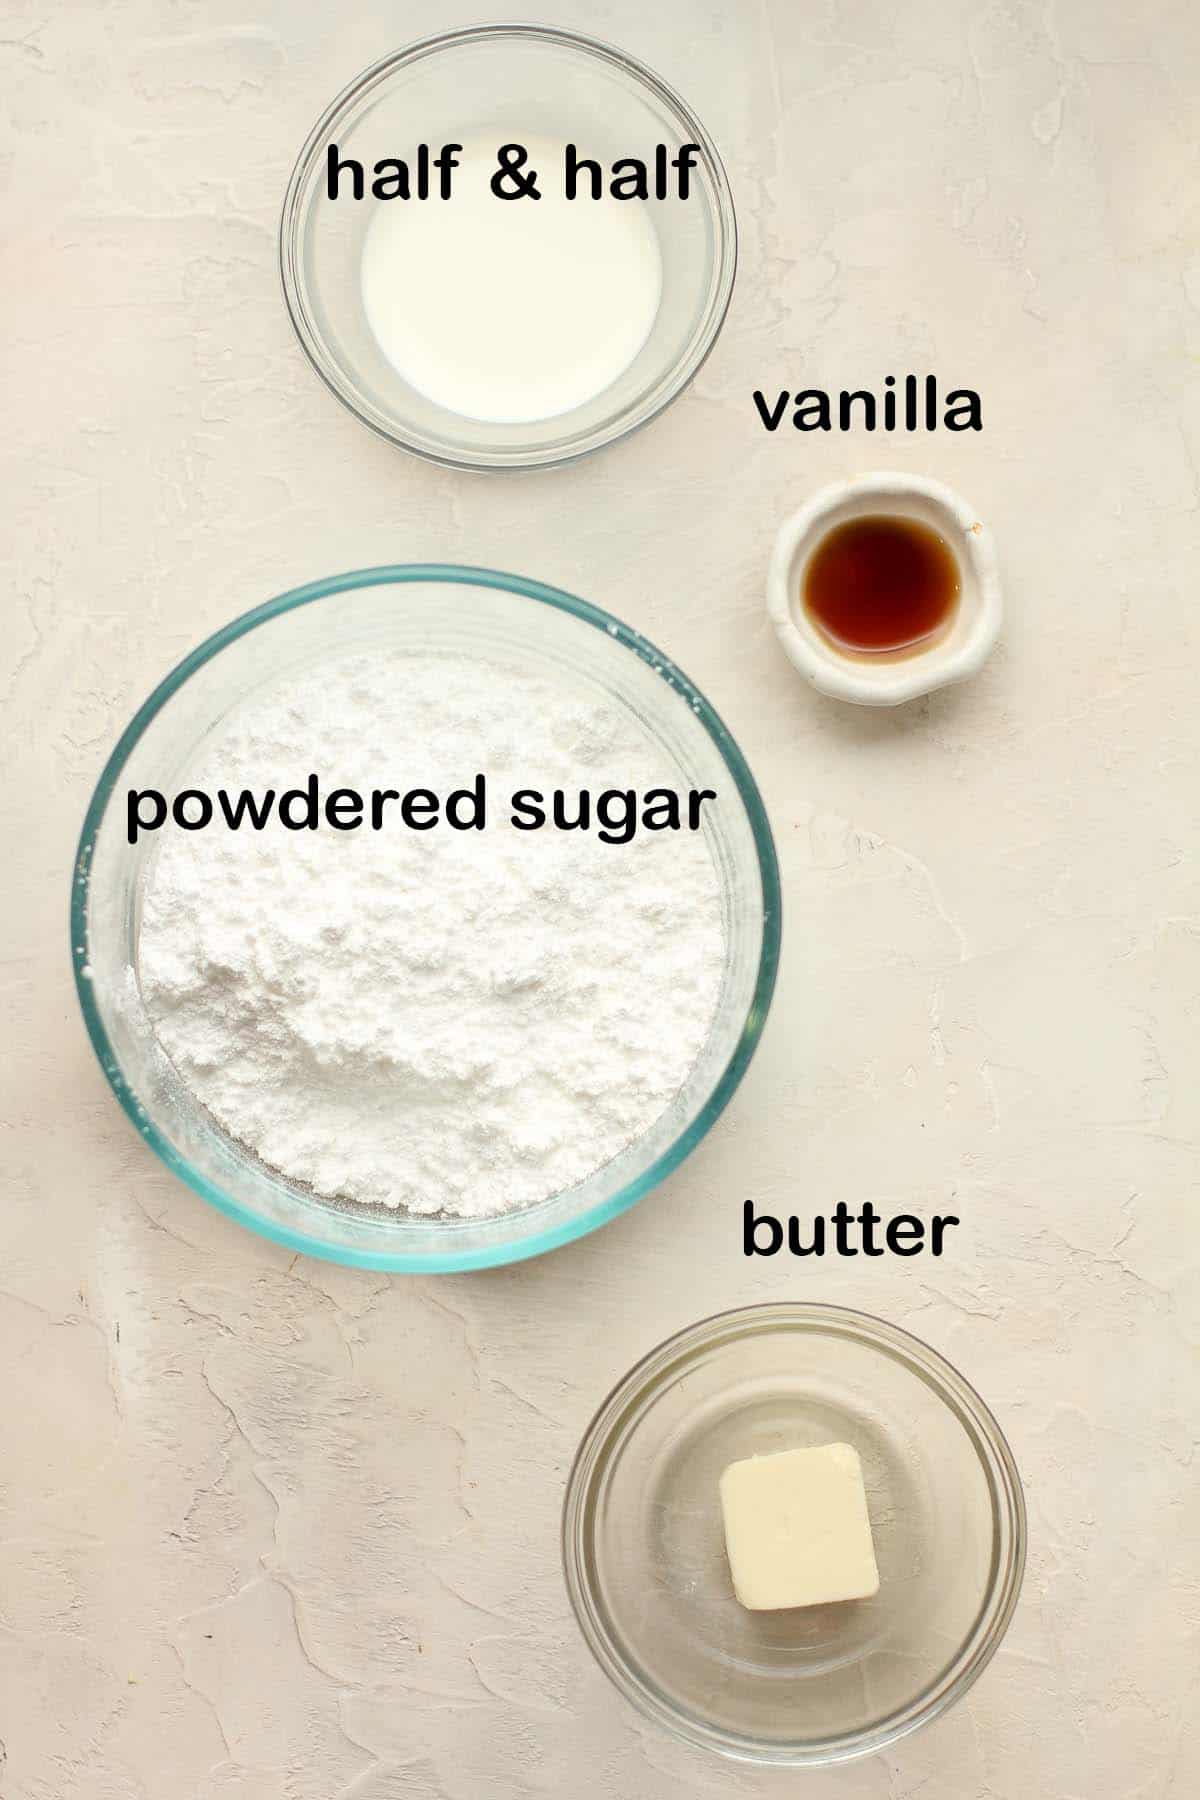 Labeled ingredients for the scone icing.